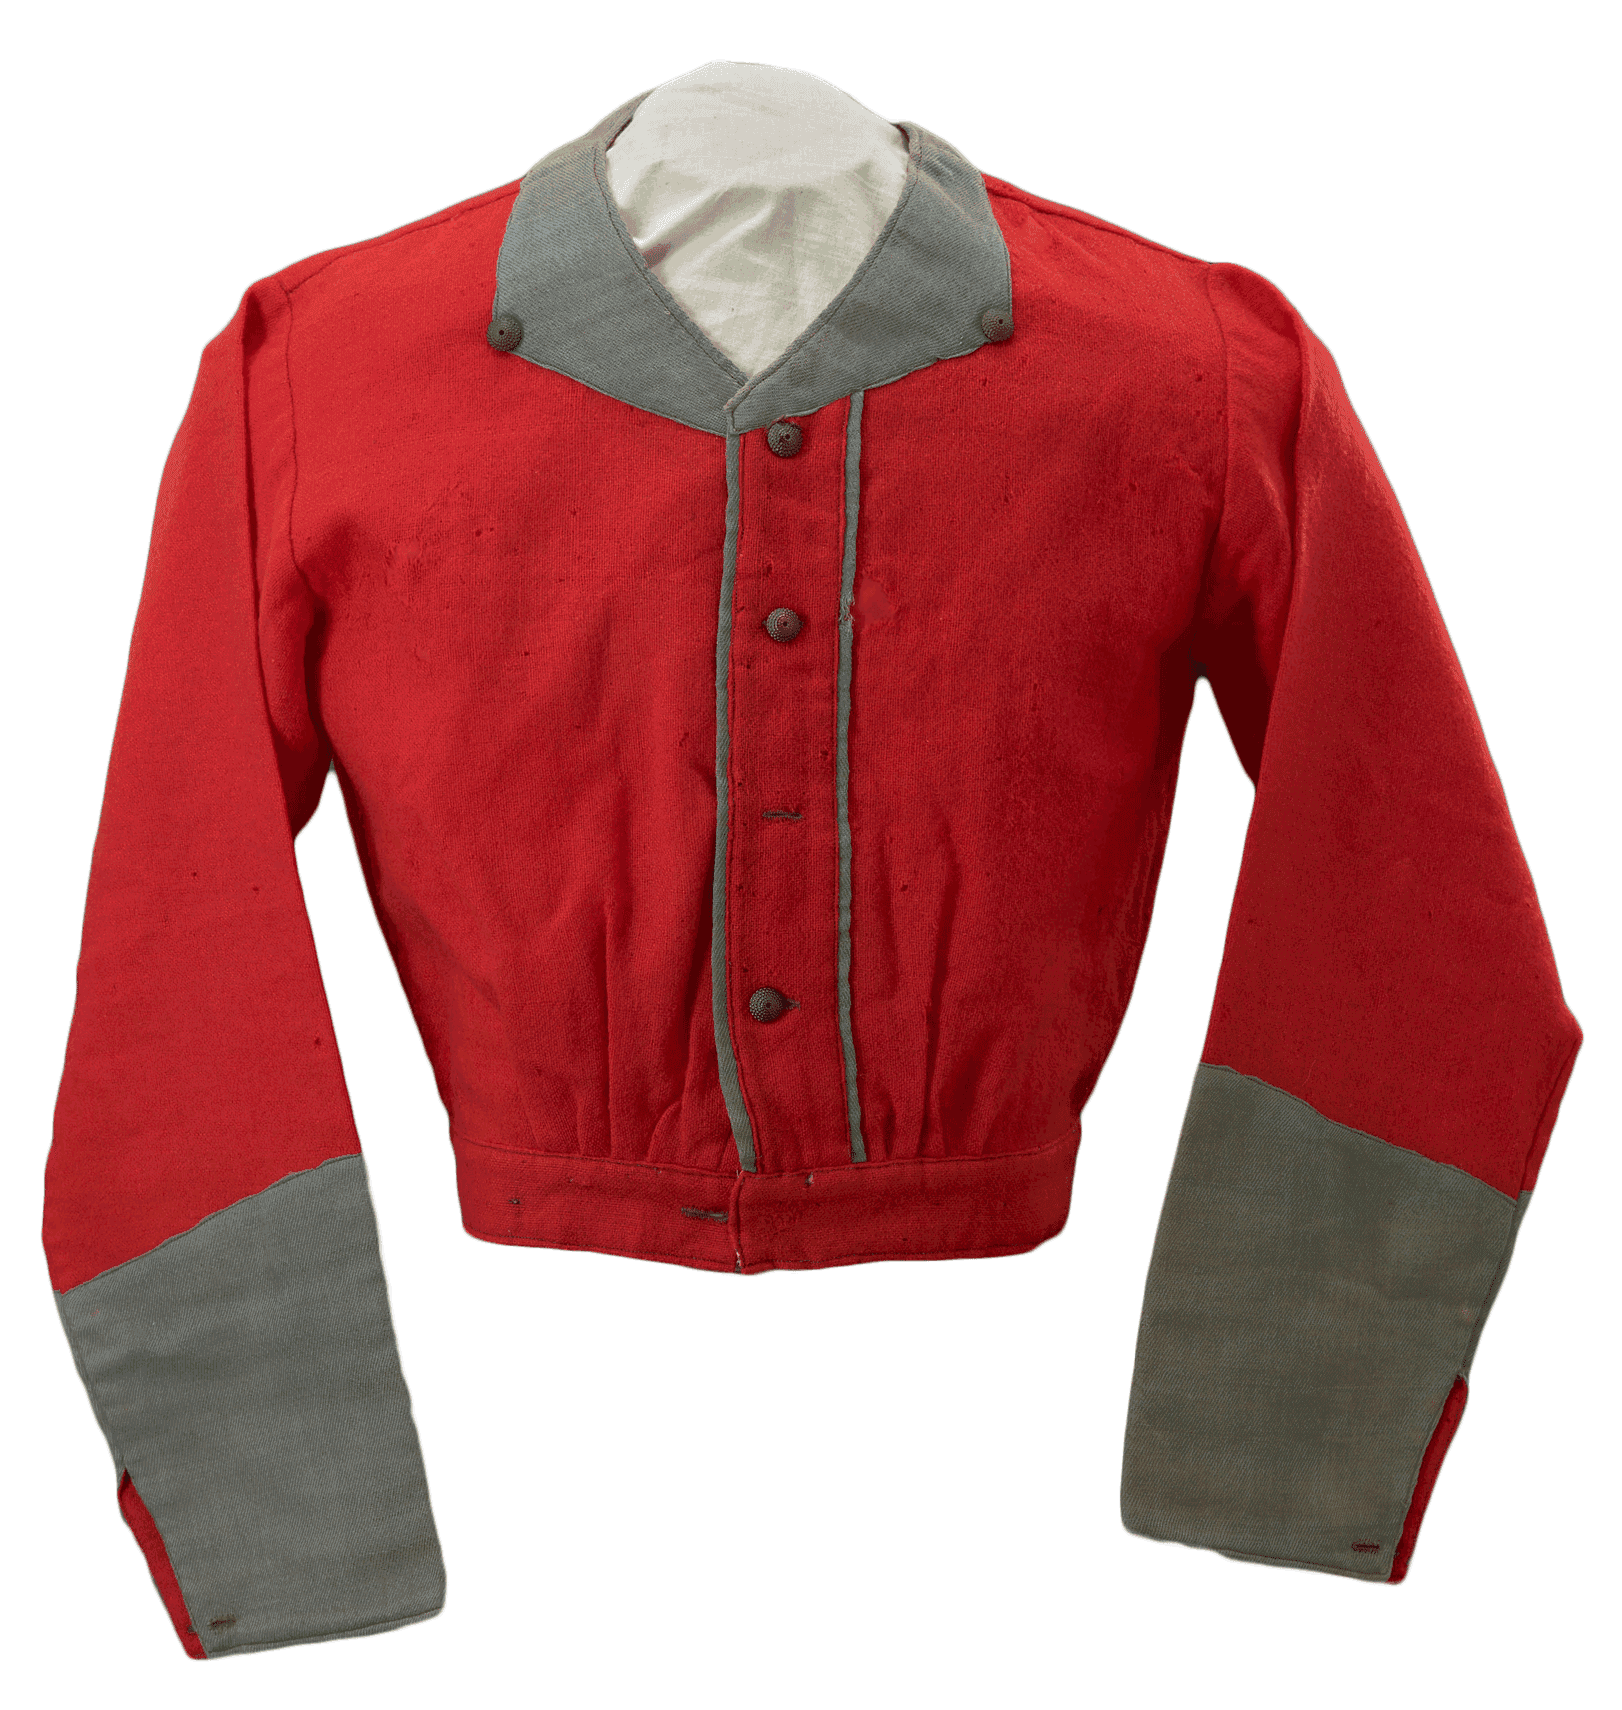 Long-sleeved red shirt with grey trim on color, sleeves and buttons.